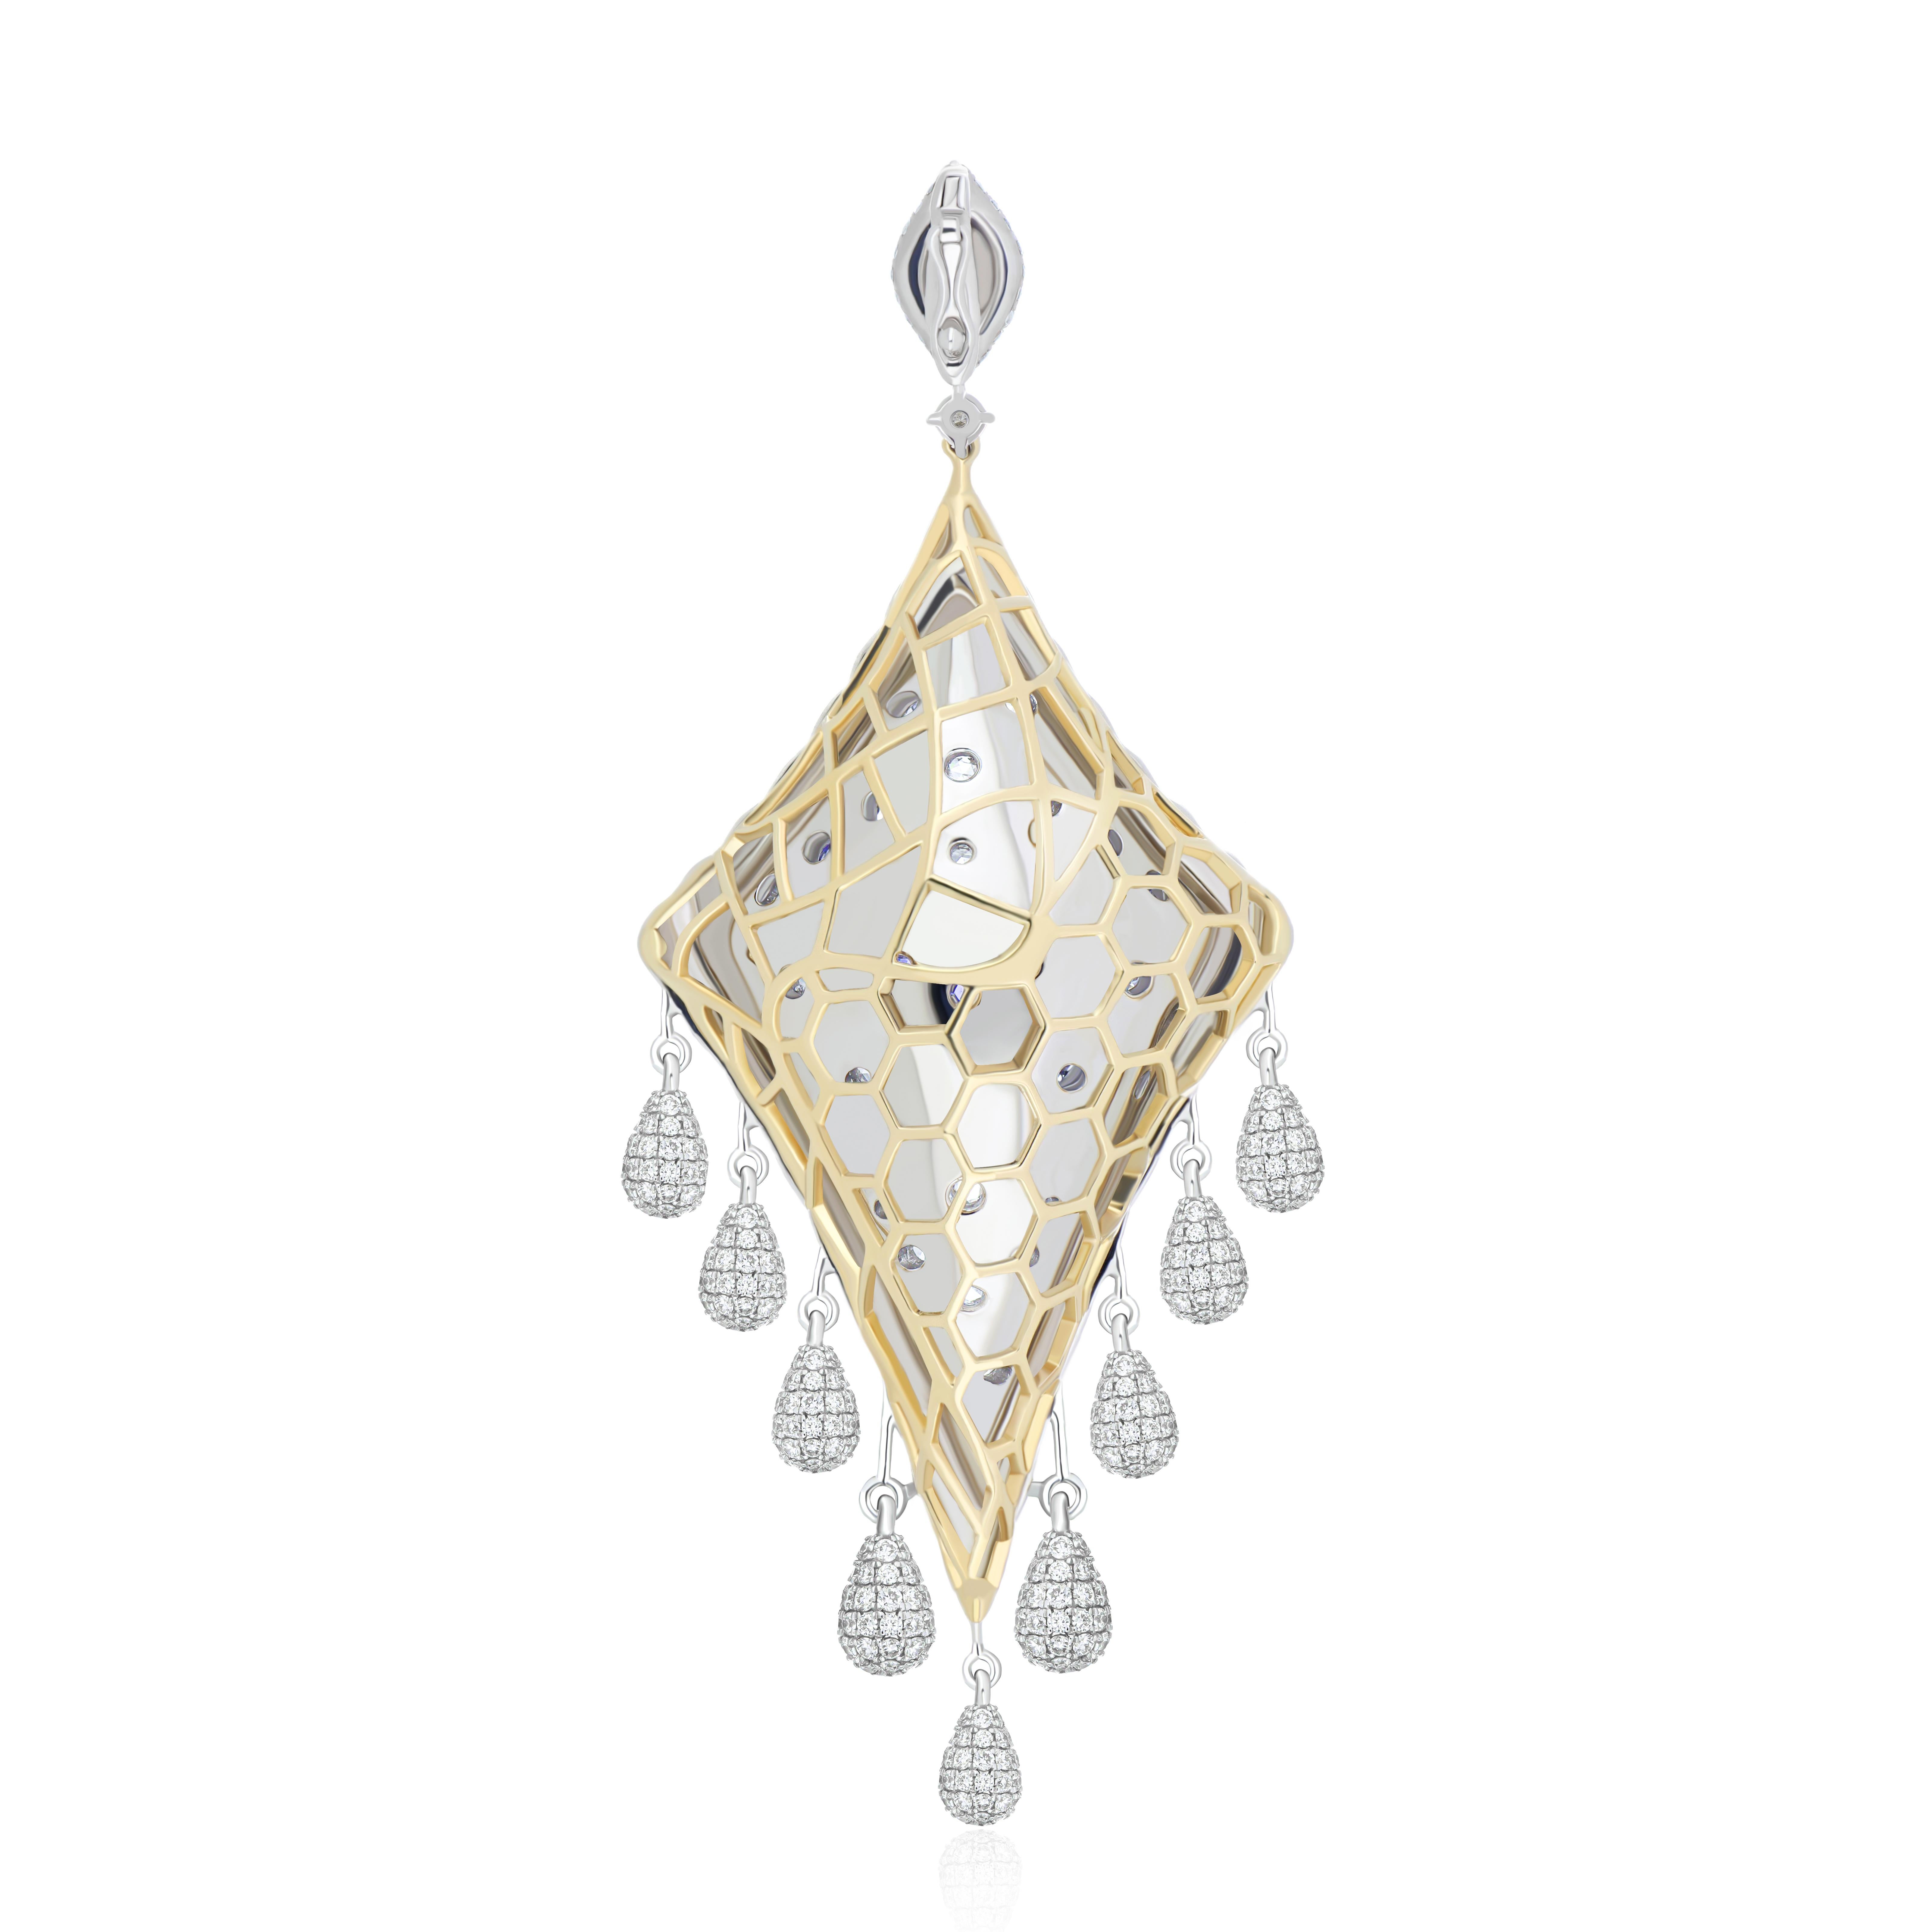 Elegant and Exquisitely detailed Gold Pendant with 16.26Cts (approx.) Fancy Shape Tanzanite set in the center beautifully accented with Micro pave set Diamonds, weighing approx. 10.55 CT's (approx.). total carat weight to further enhance the beauty